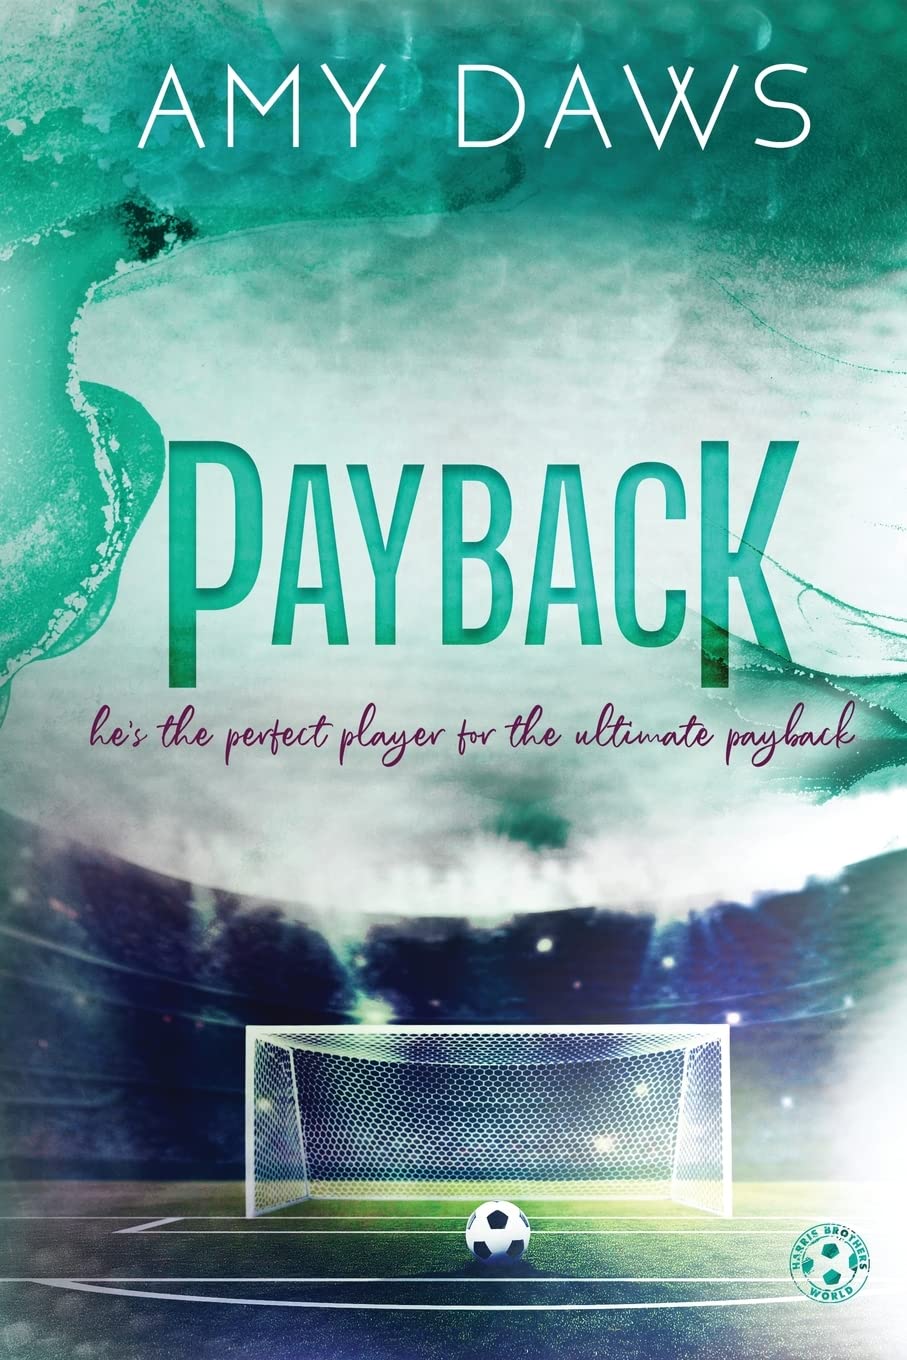 Payback - Amy Daws